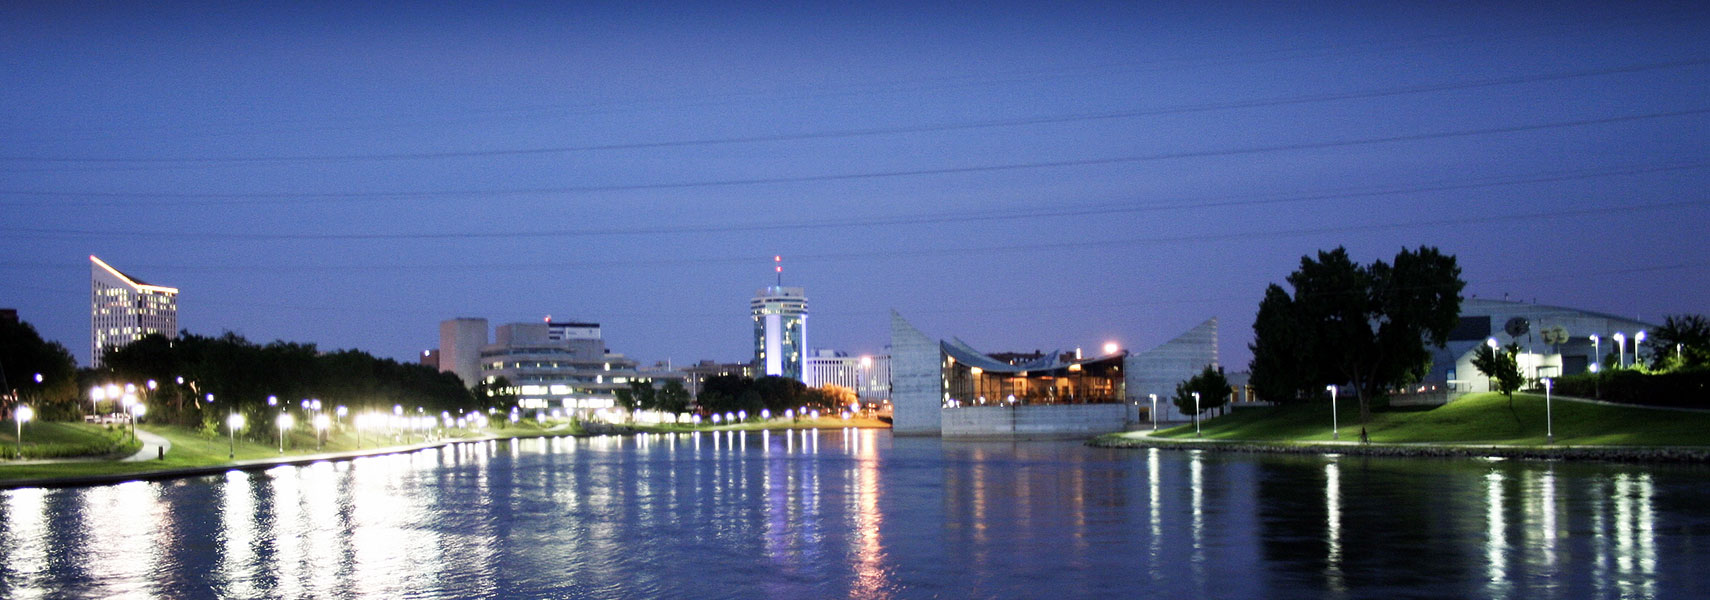 Wichita at night with Exploration Place the Arkansas River